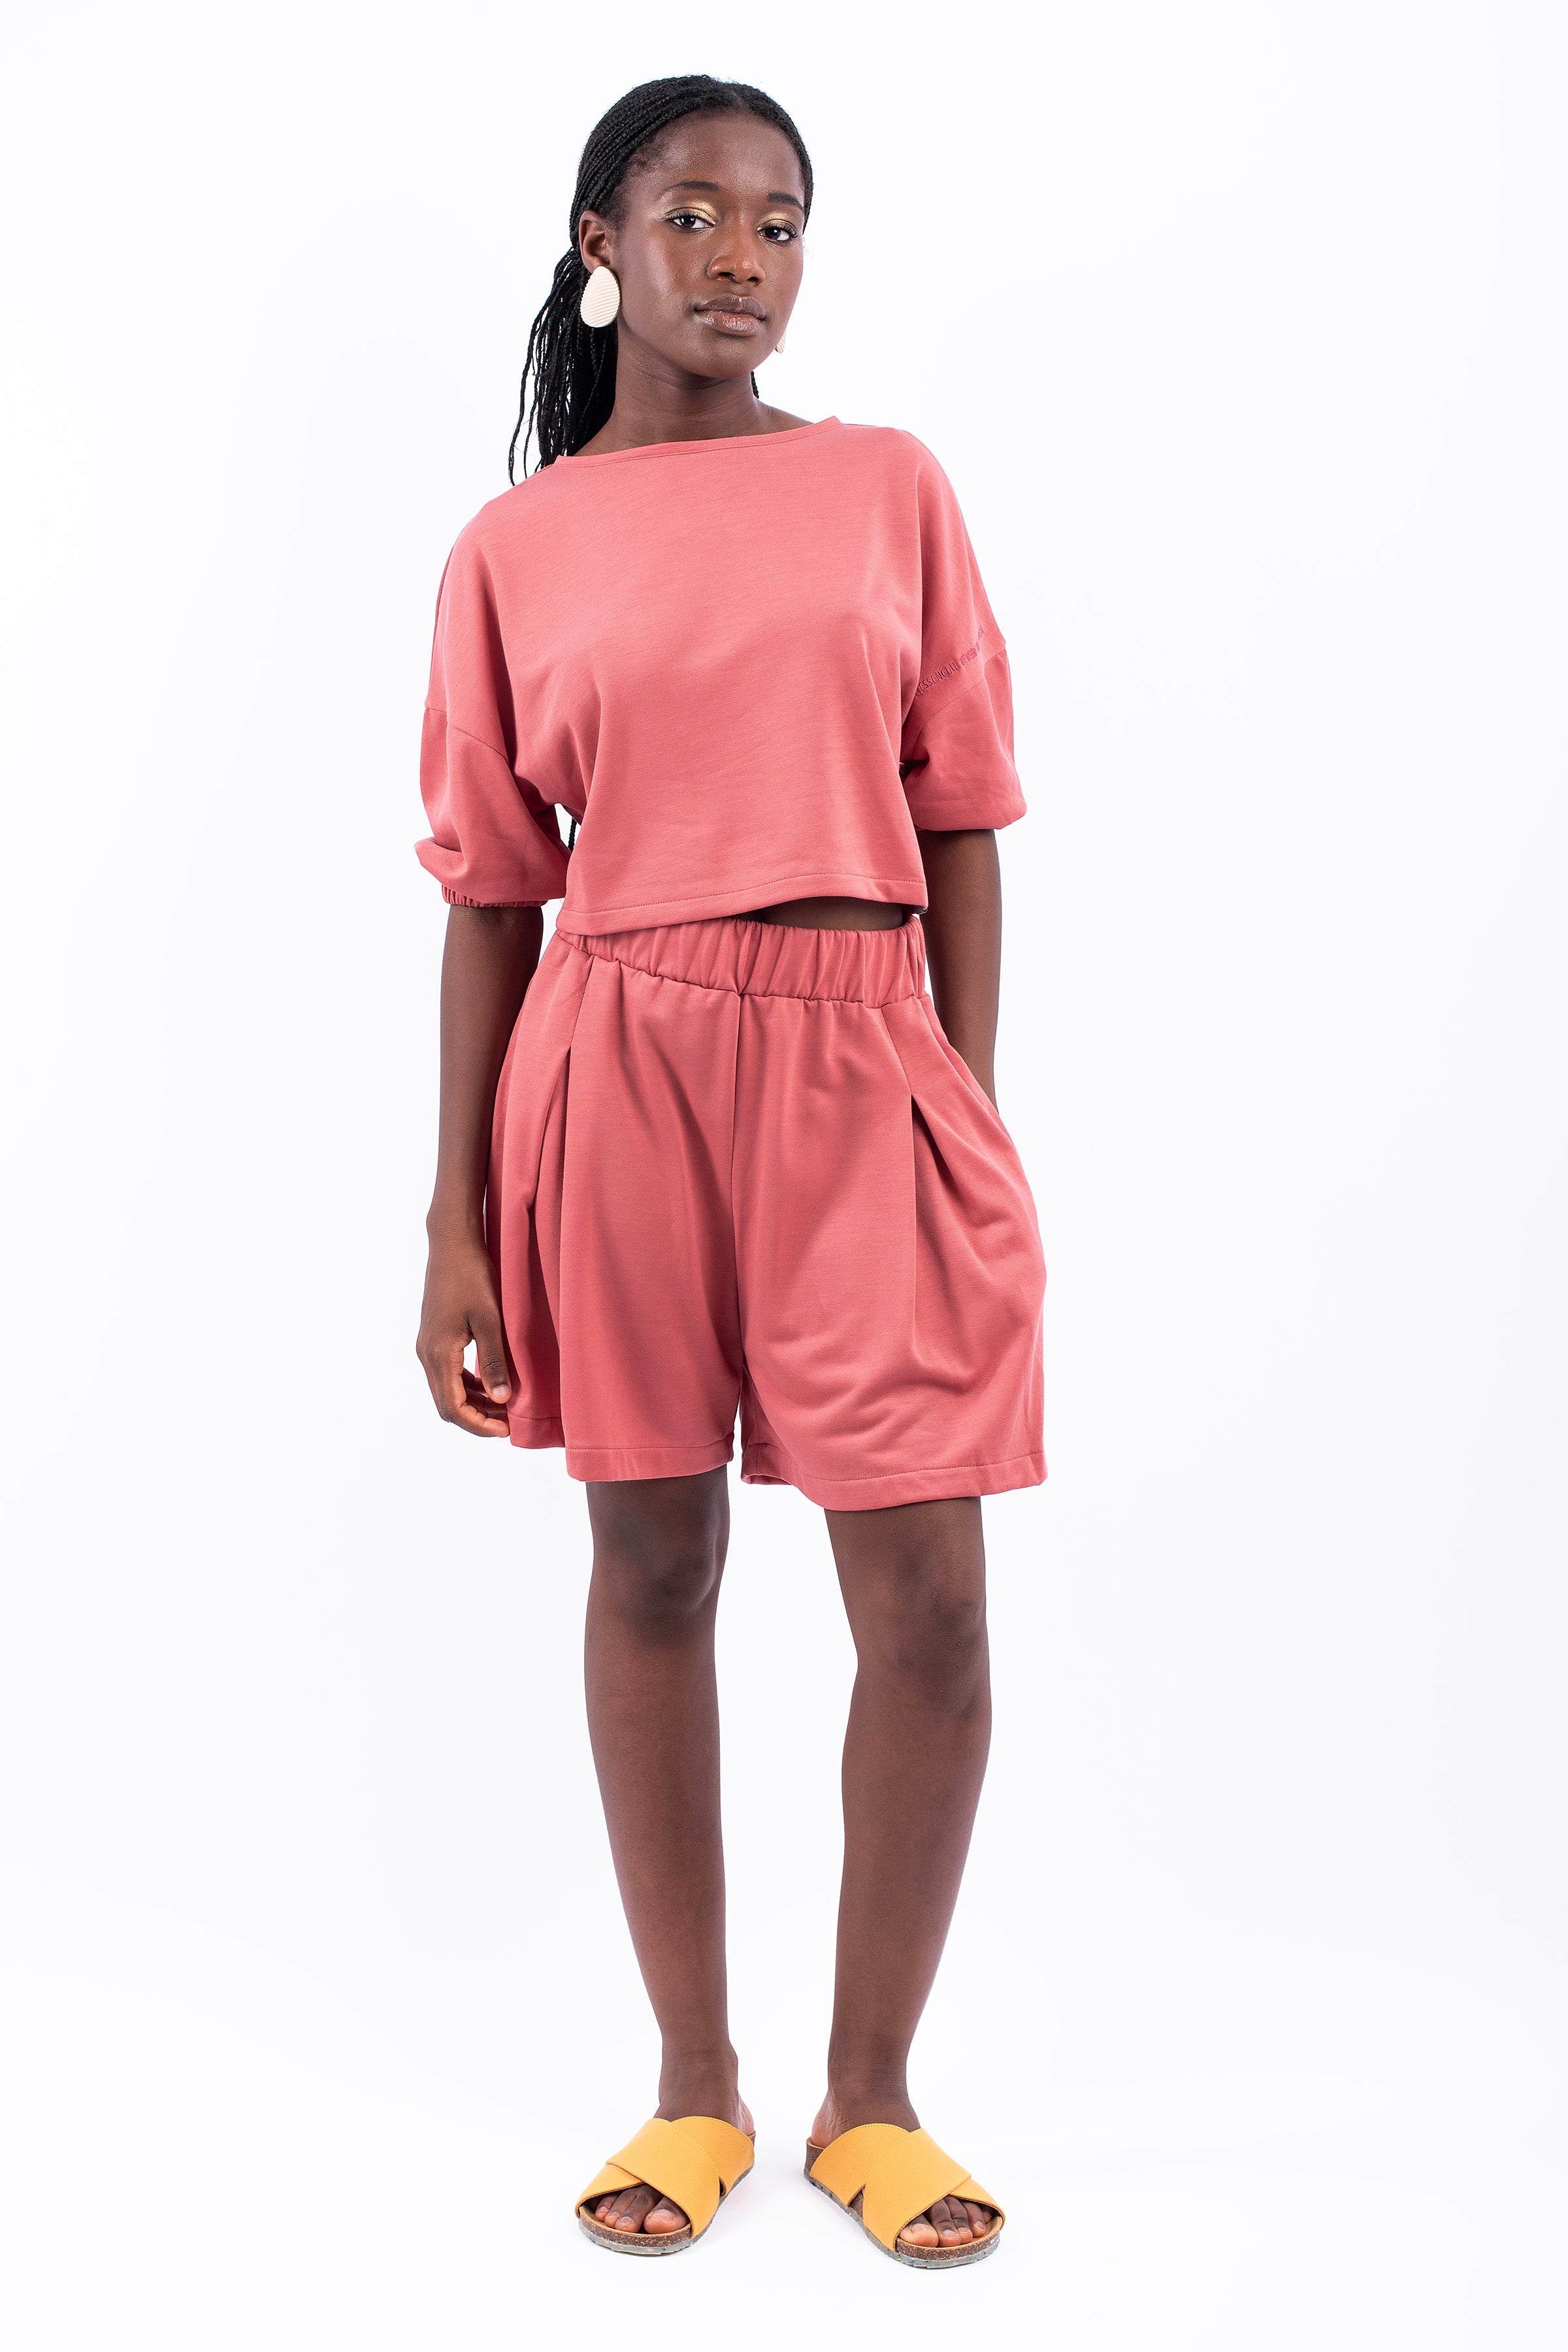 Essence Doble Crop Top Faded Rose